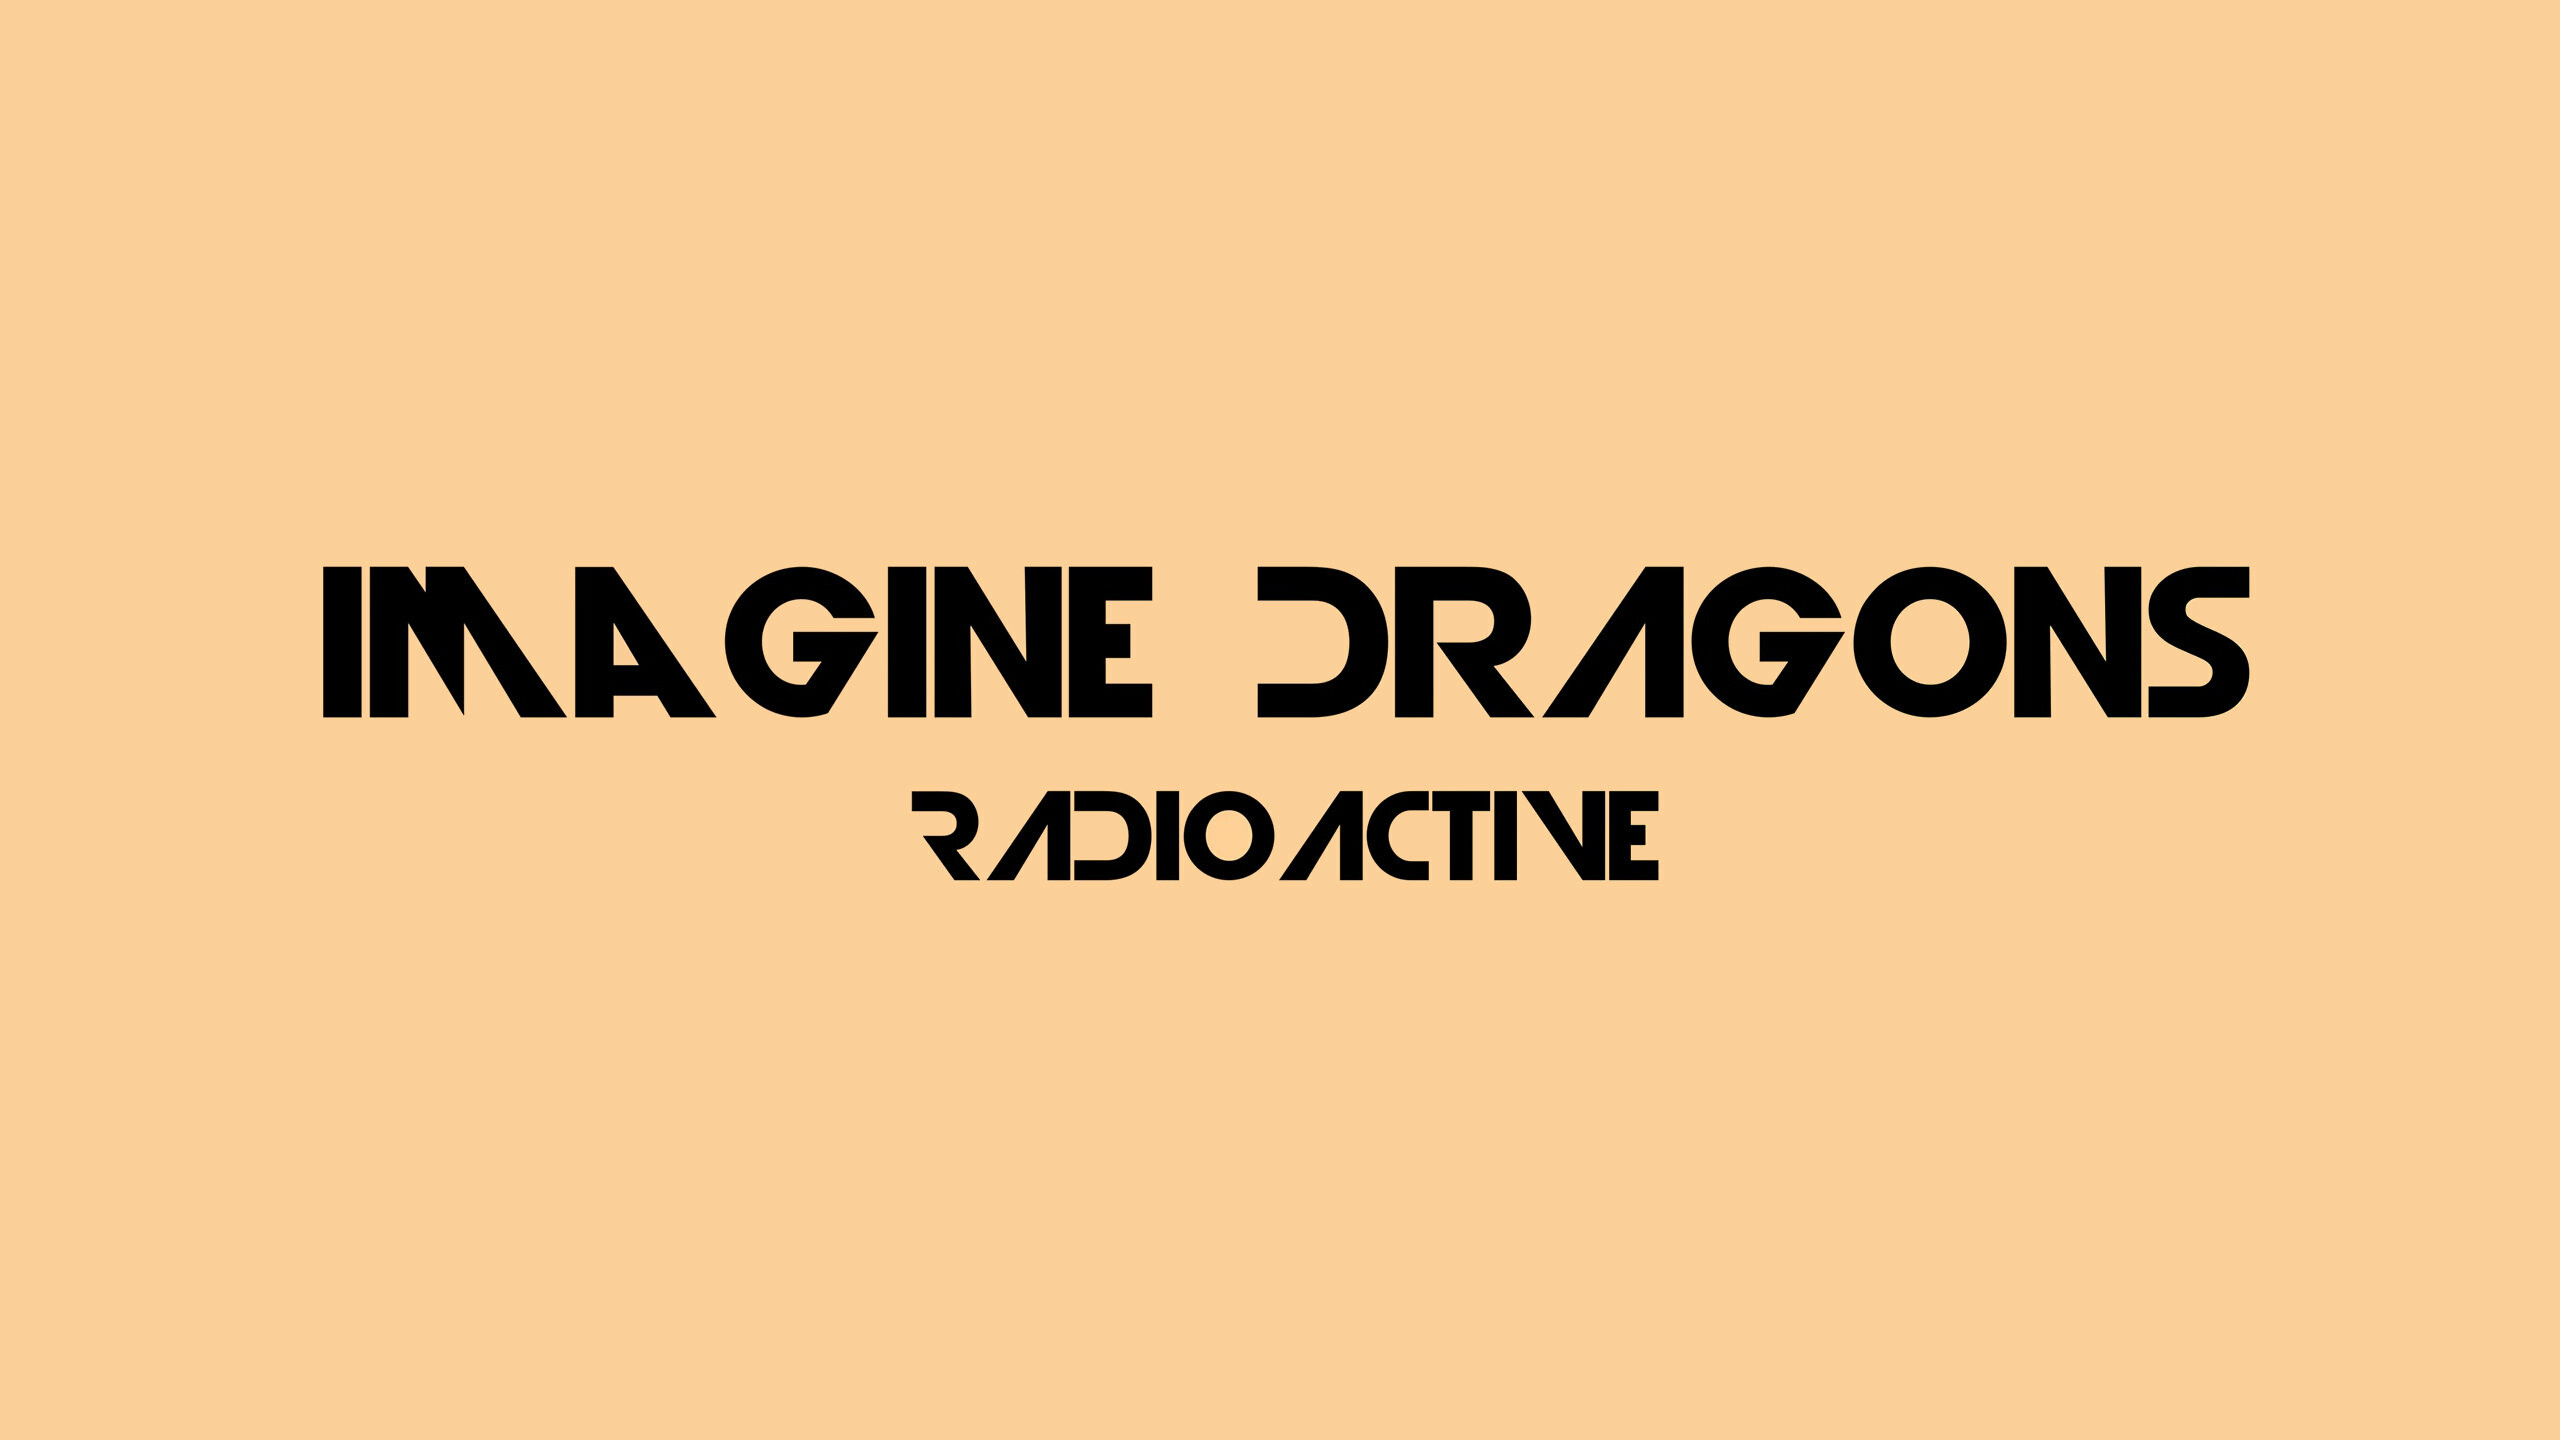 Imagine Dragons: "Radioactive" reached at number 3 on the US Billboard Hot 100. 2560x1440 HD Background.